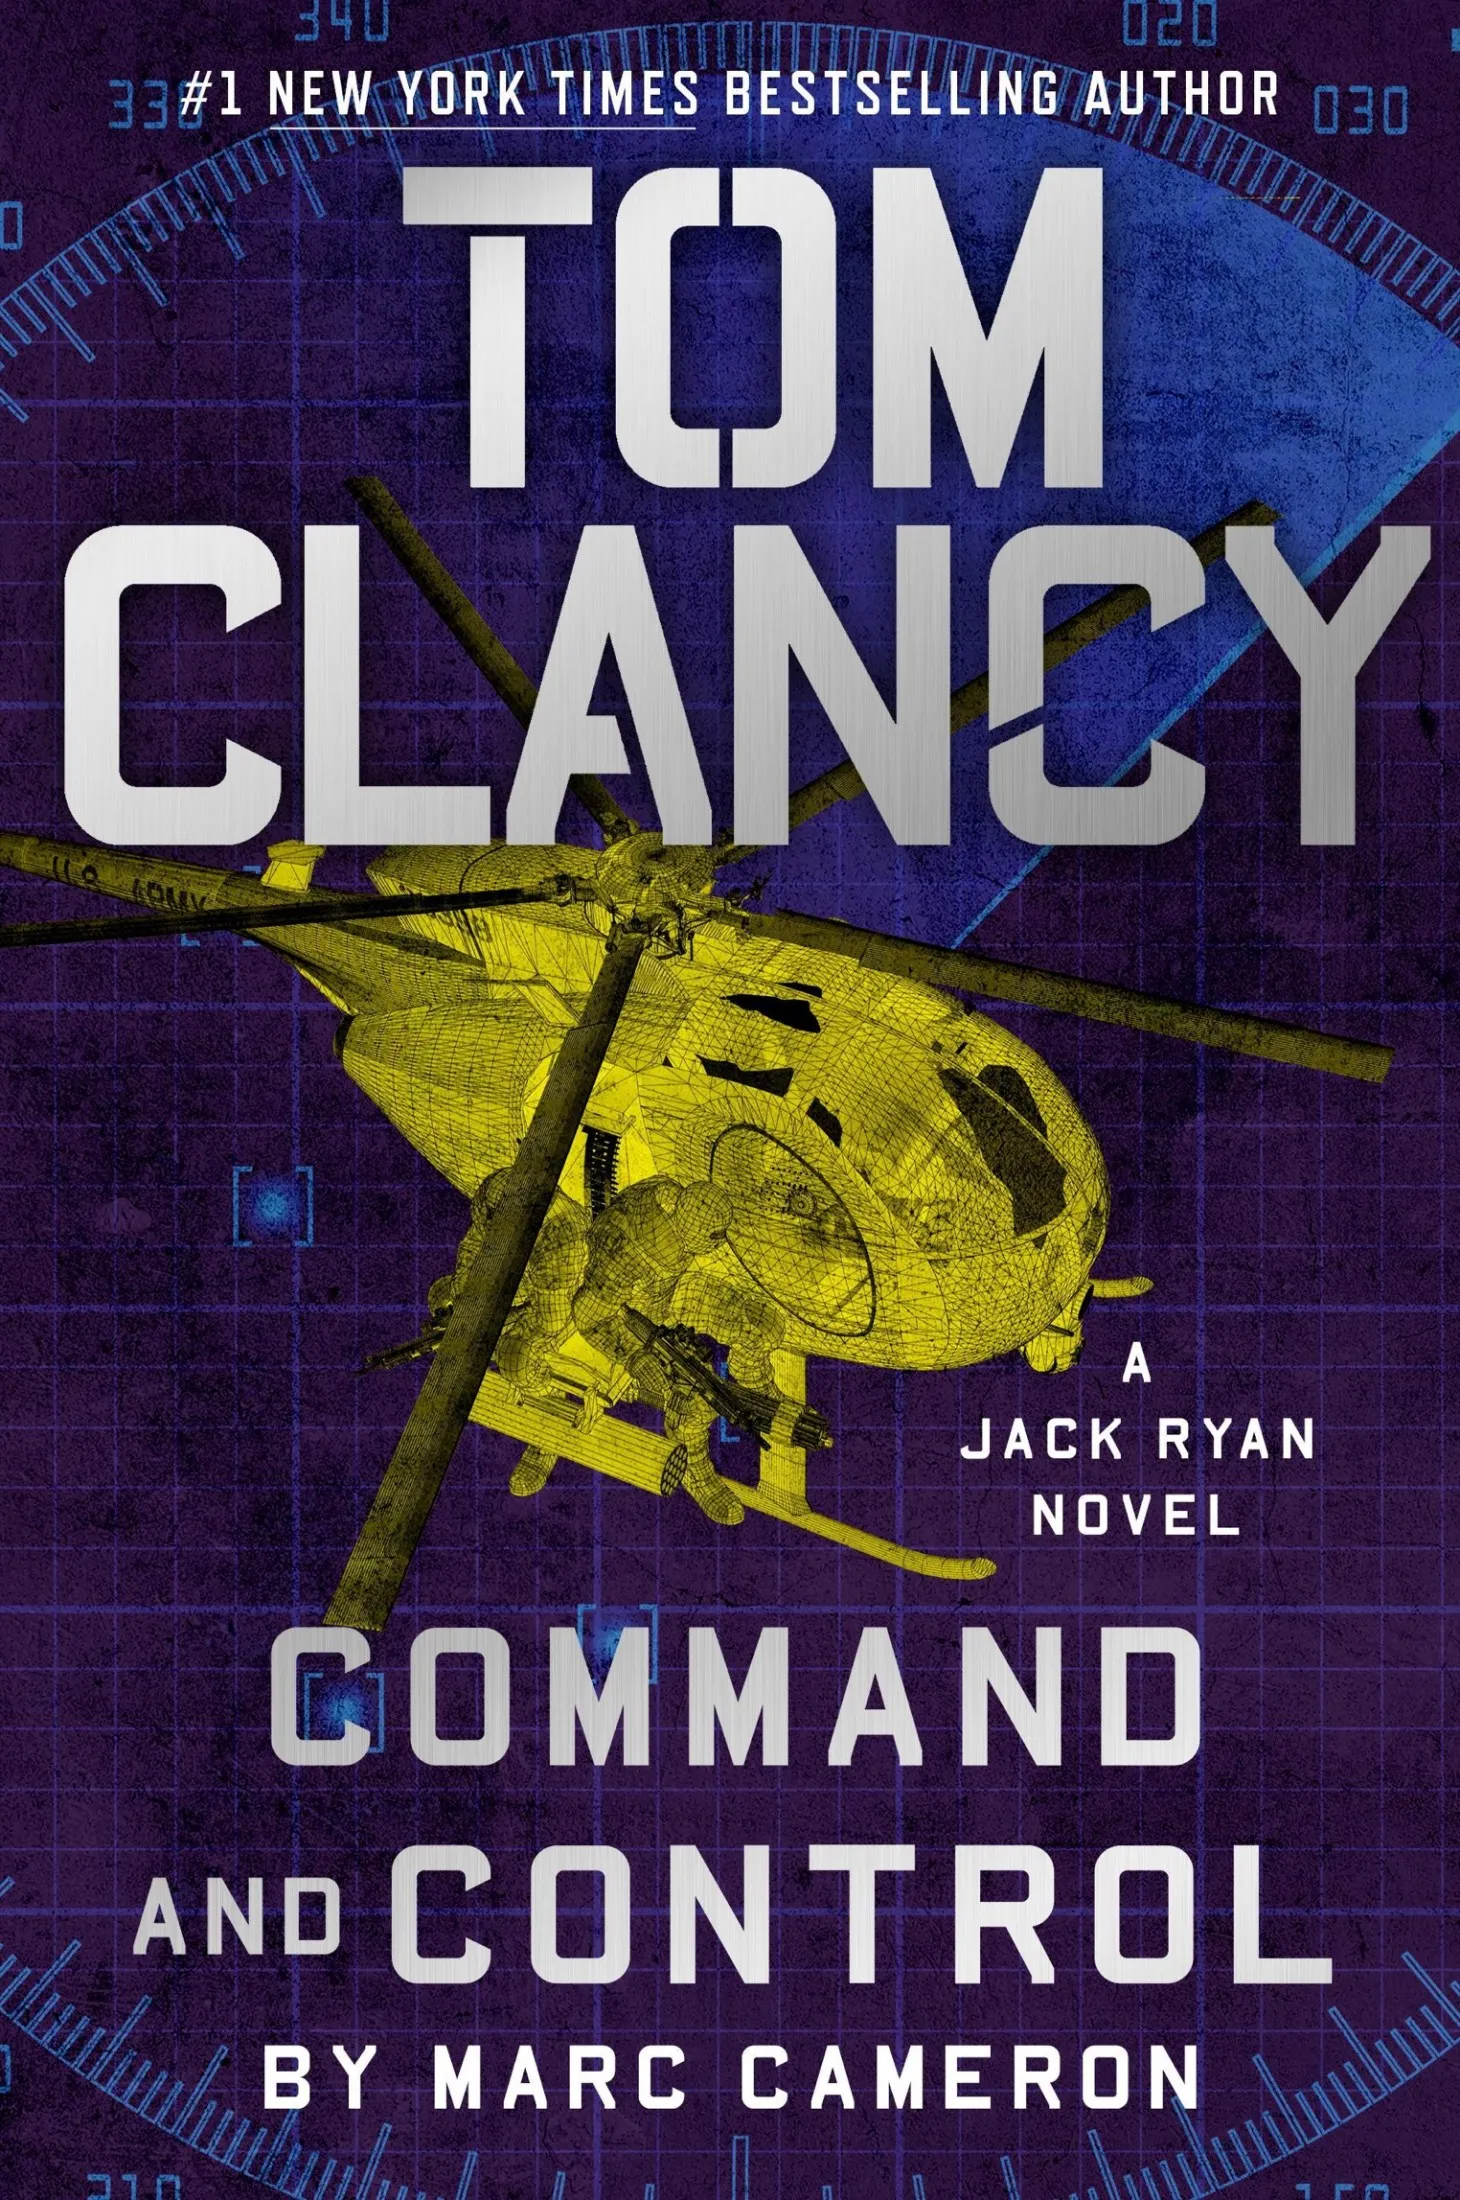 Command and Control (Jack Ryan #36)